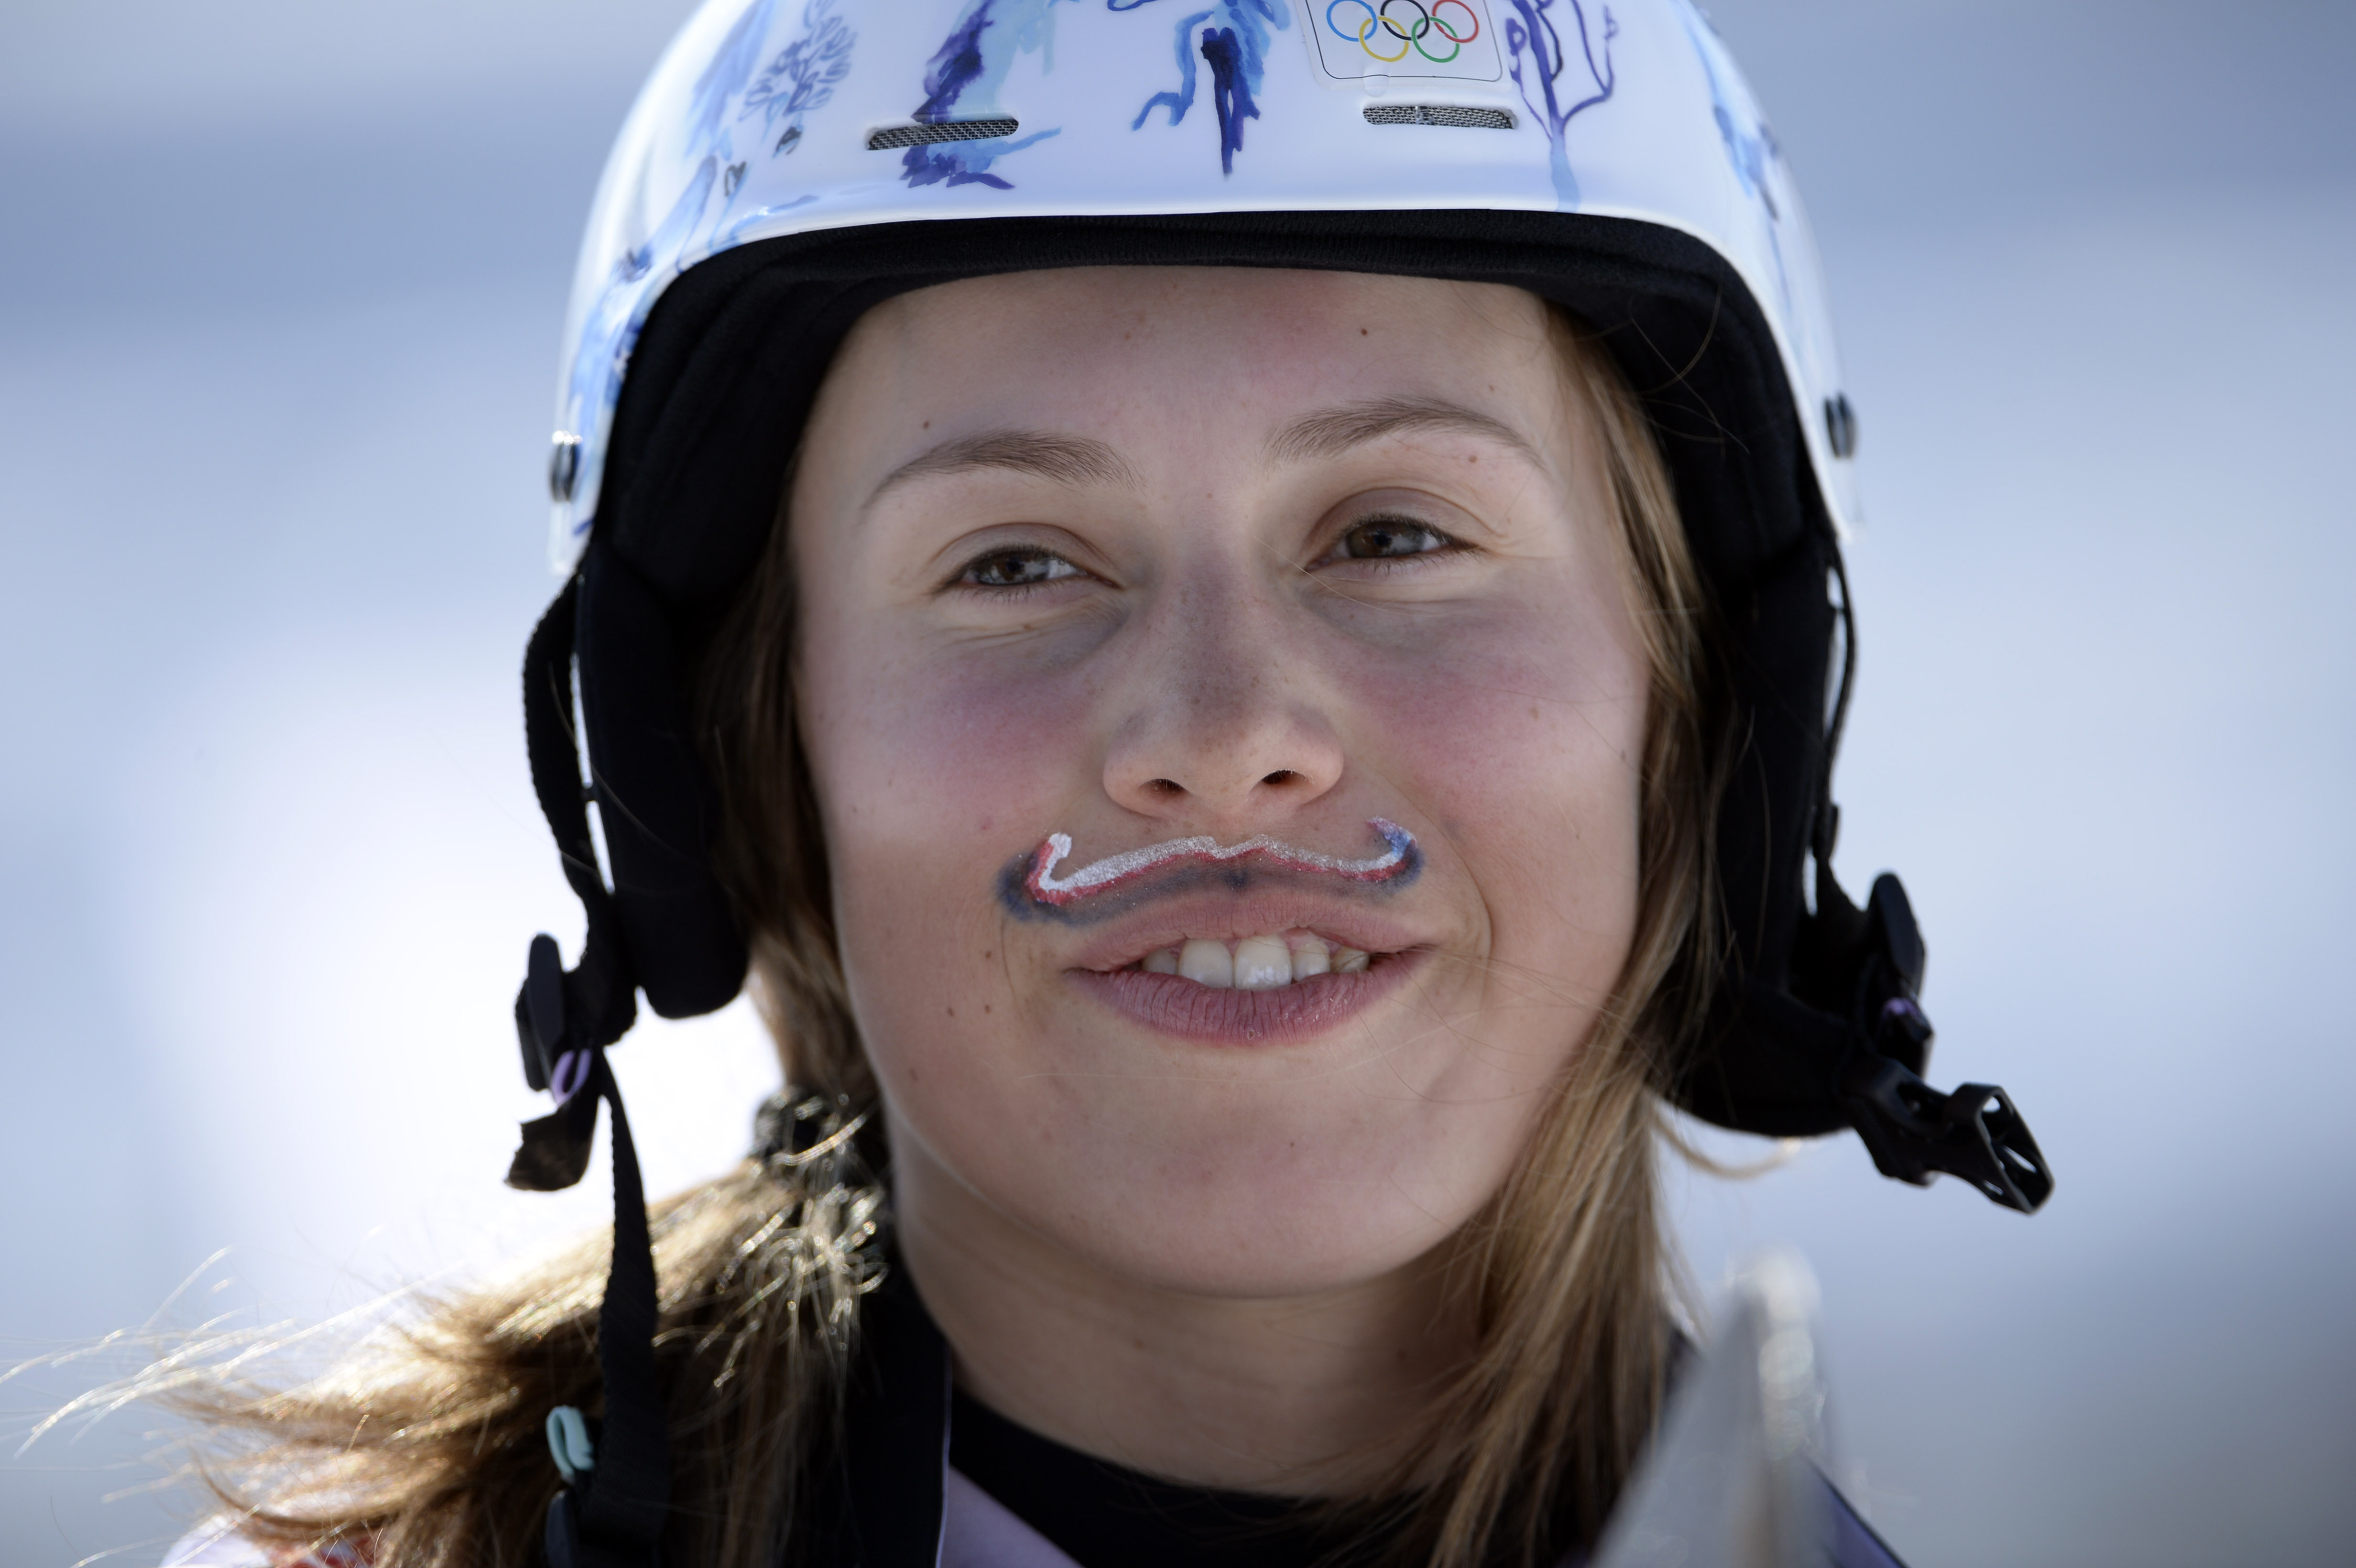 Why was this female gold medalist sporting a painted mustache